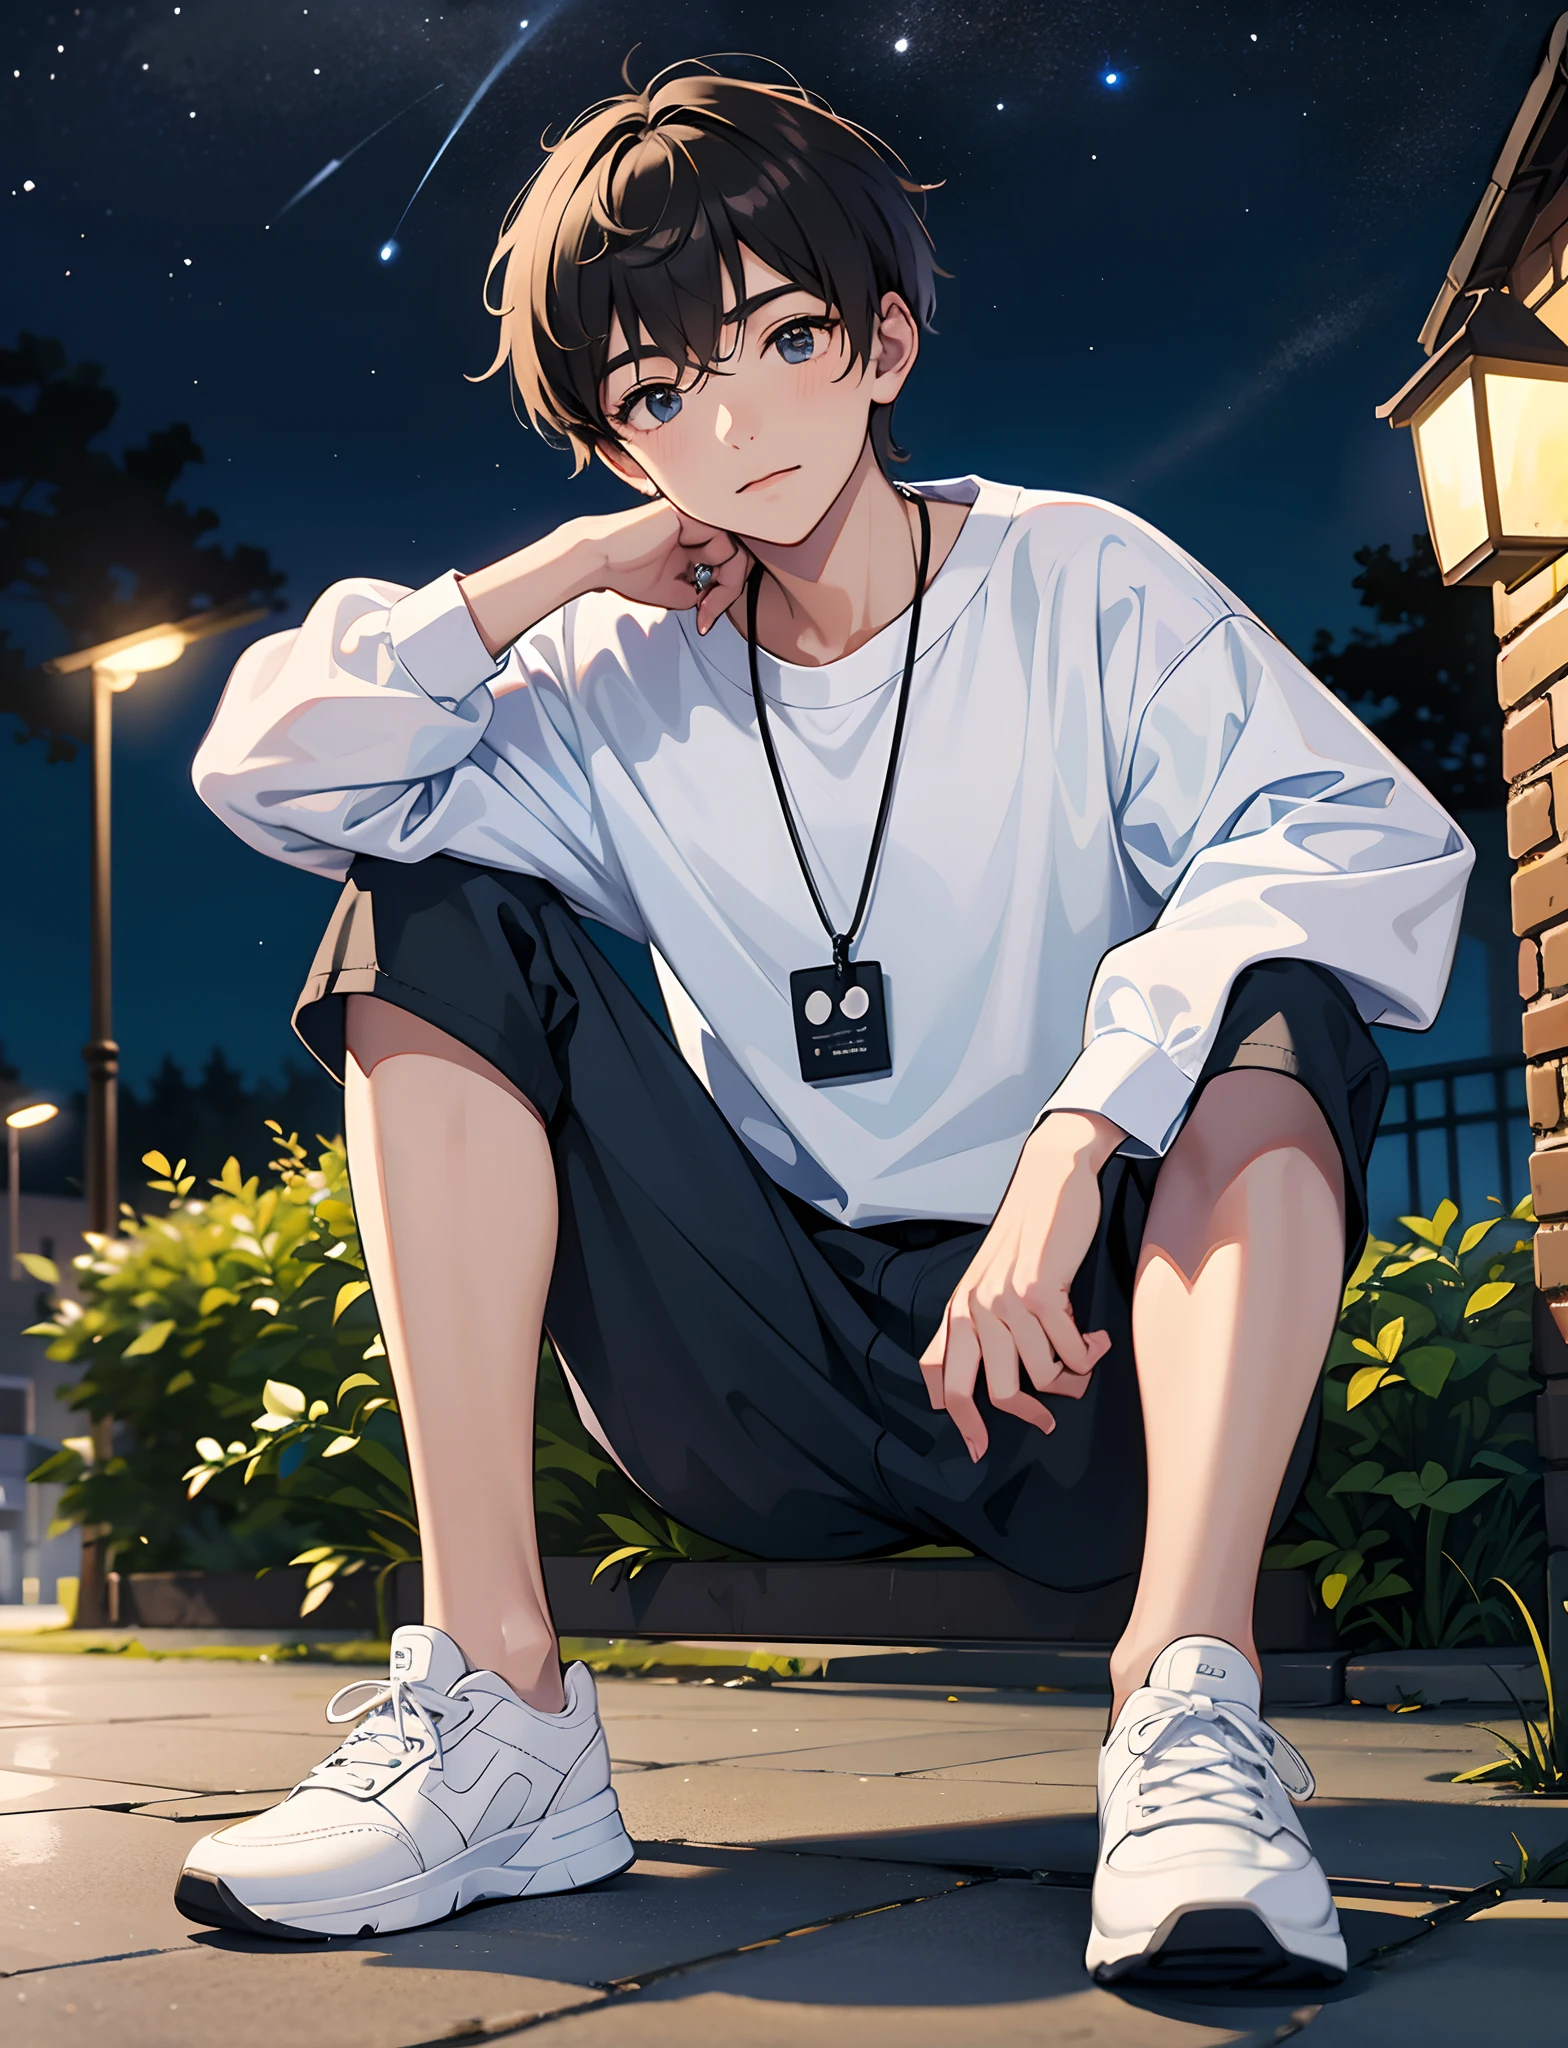 A young boy with，dressed in casual attire，Wear sneakers，With a necklace，Sit under a street lamp，the night，Looking at the stars in the sky，Close-up of people，Ultra-high definition